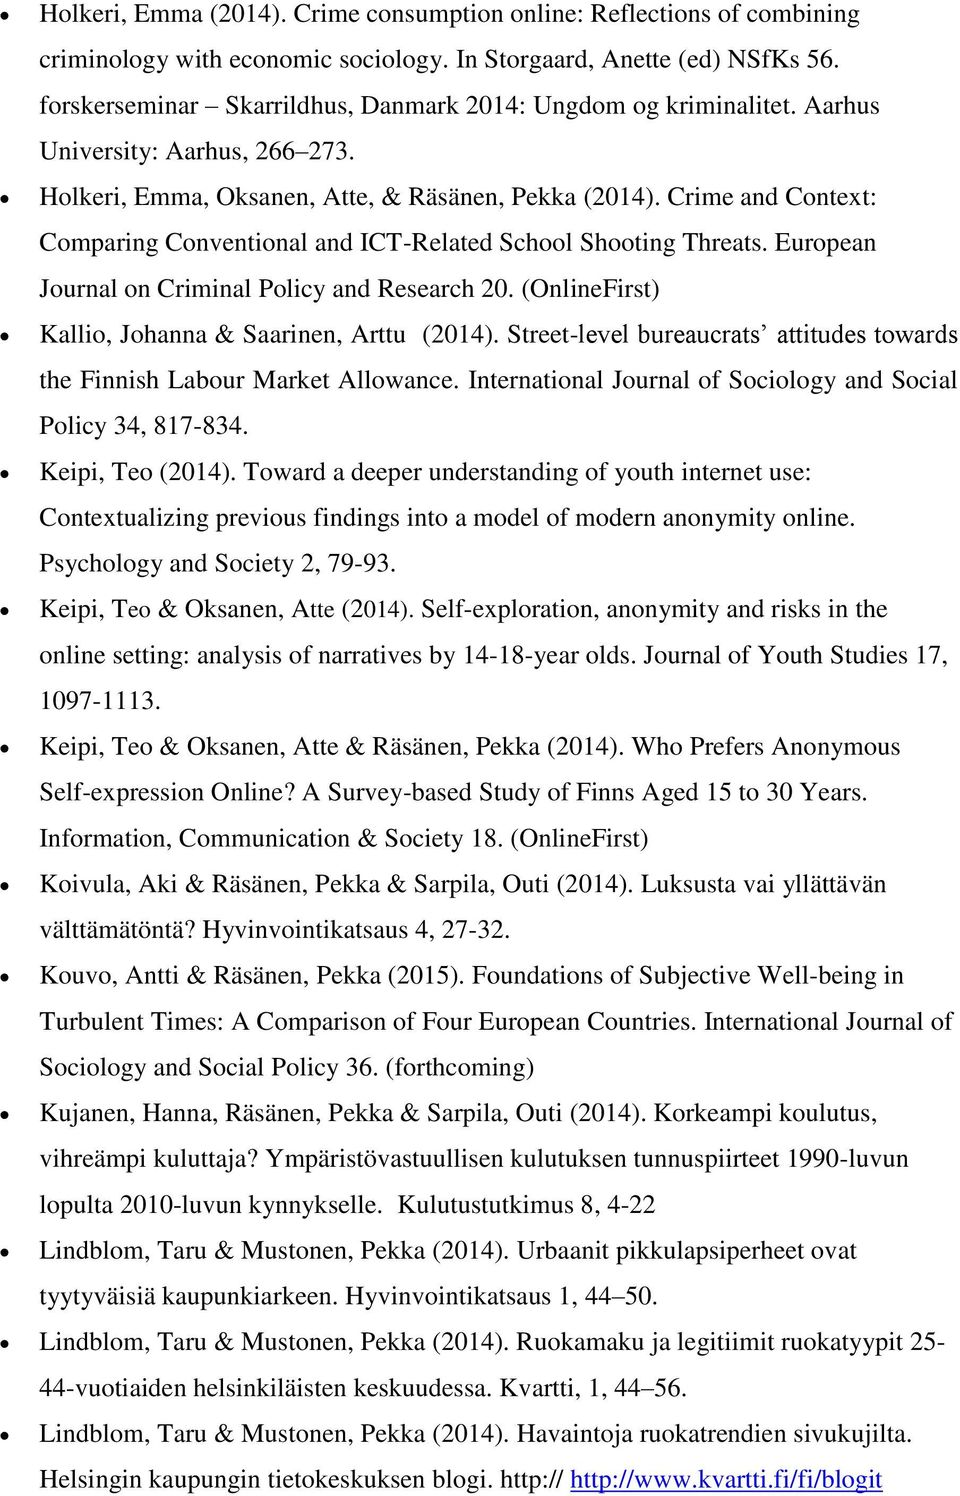 Crime and Context: Comparing Conventional and ICT-Related School Shooting Threats. European Journal on Criminal Policy and Research 20. (OnlineFirst) Kallio, Johanna & Saarinen, Arttu (2014).